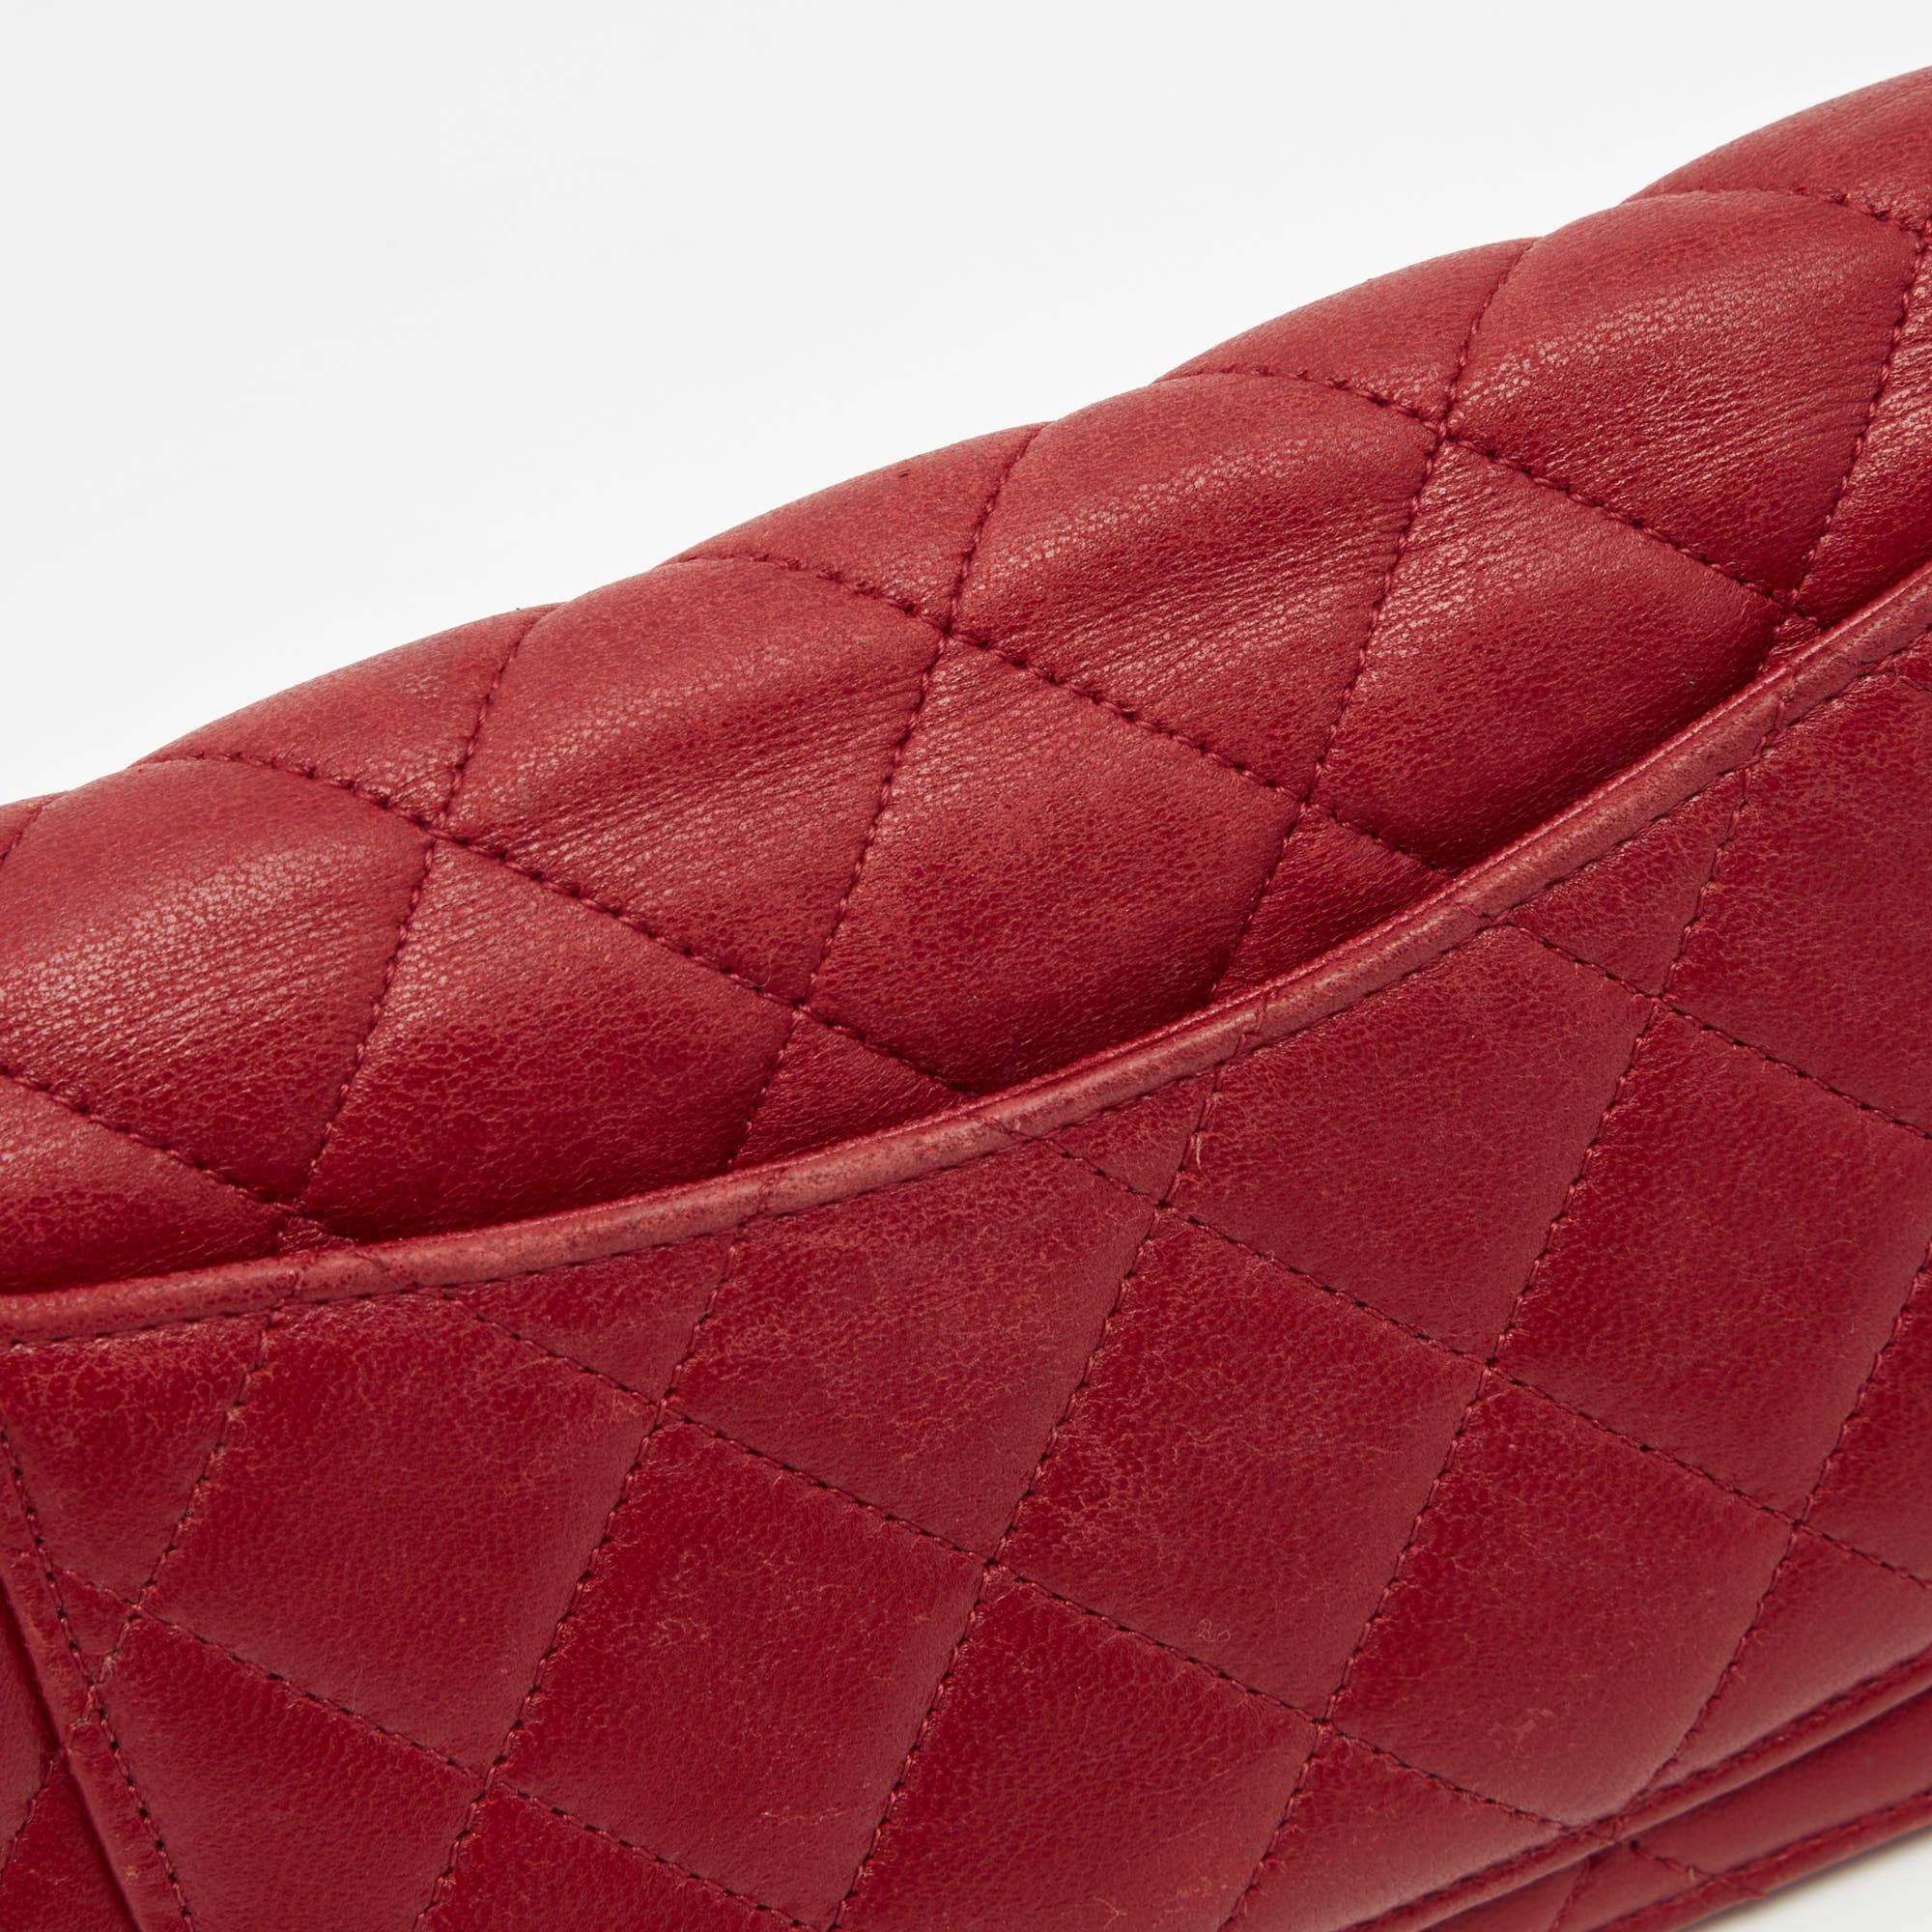 Timeless CHANEL CLASSIC POUCH IN RED QUILTED LEATHER LEATHER POUCH  ref.321287 - Joli Closet